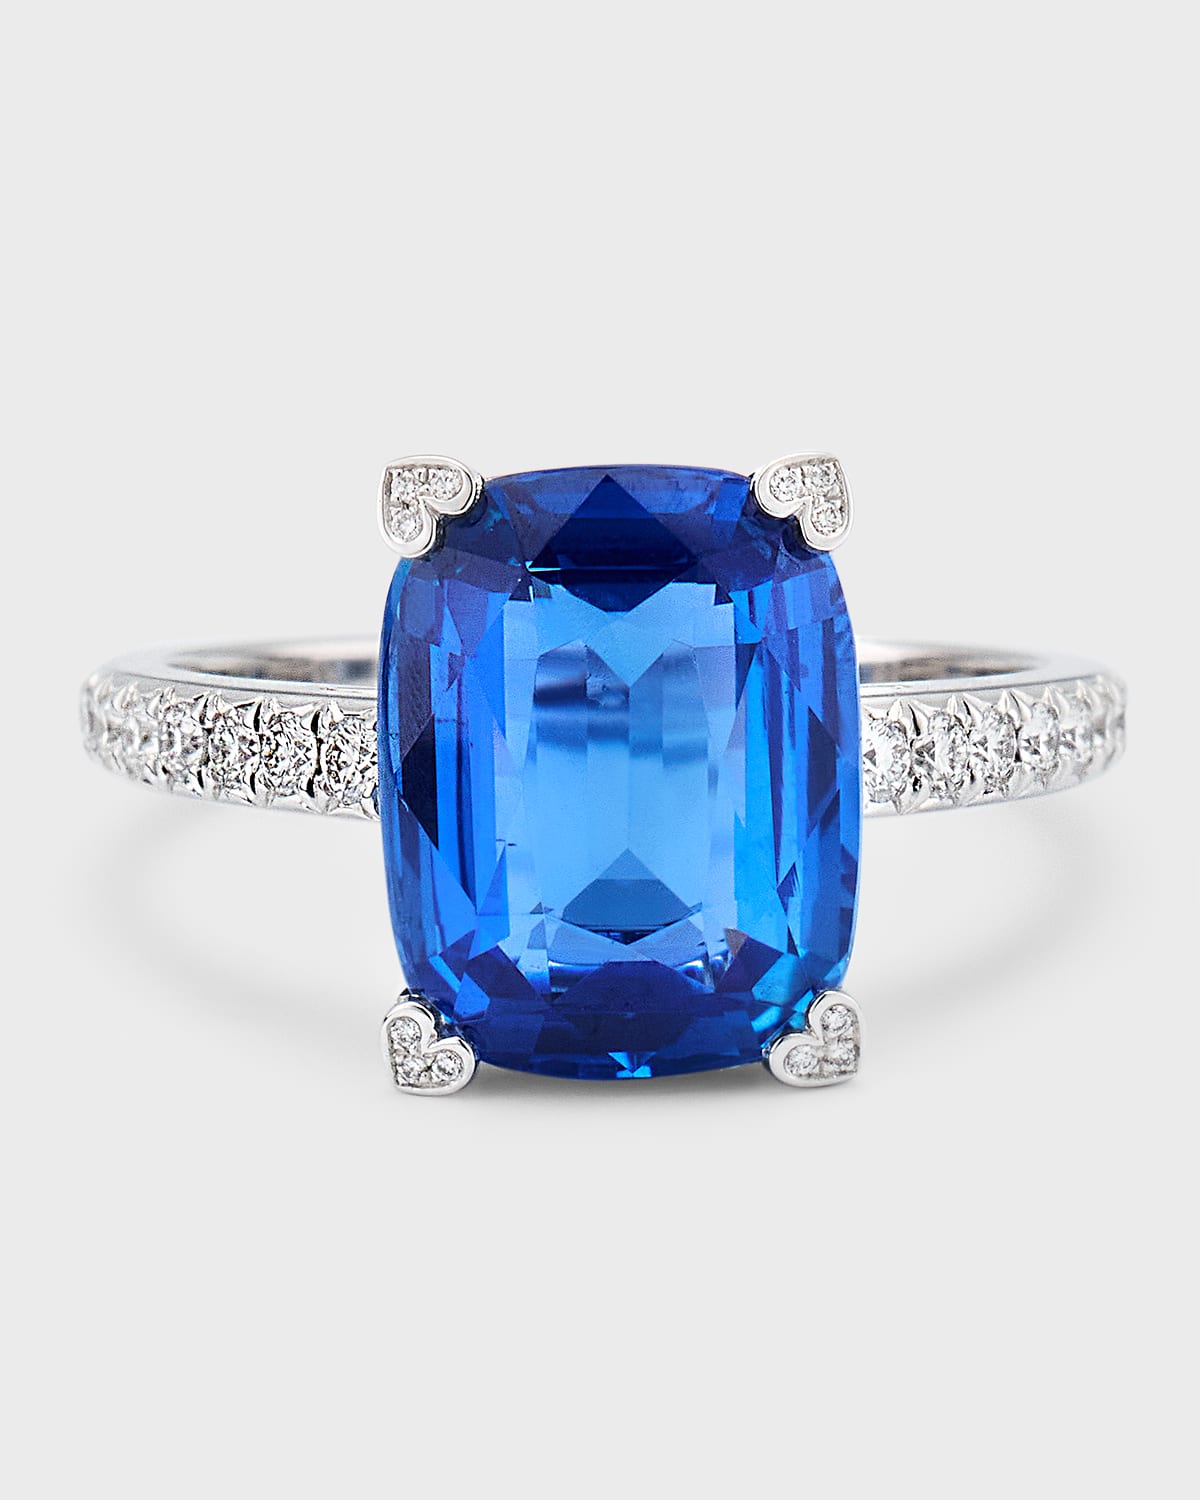 High Jewelry 18K White Gold One-of-a-Kind Blue Sapphire Solitaire Ring, EU 53 / US 6.25